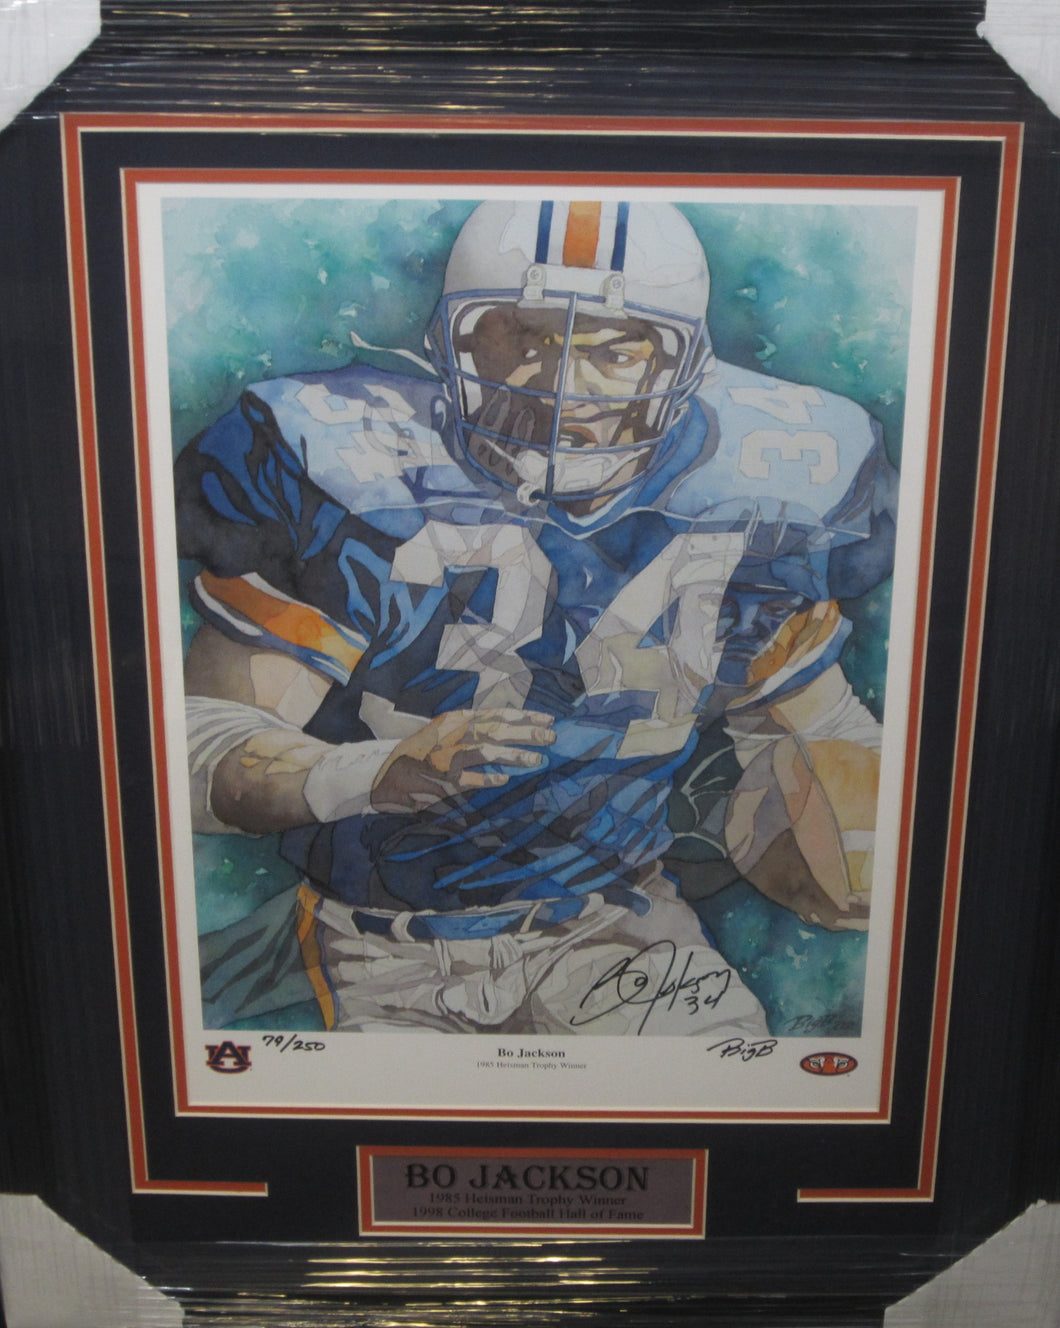 Auburn University Tigers Bo Jackson Signed 16x20 Lithograph Photo with Big B Inscription Framed & Matted with JSA COA